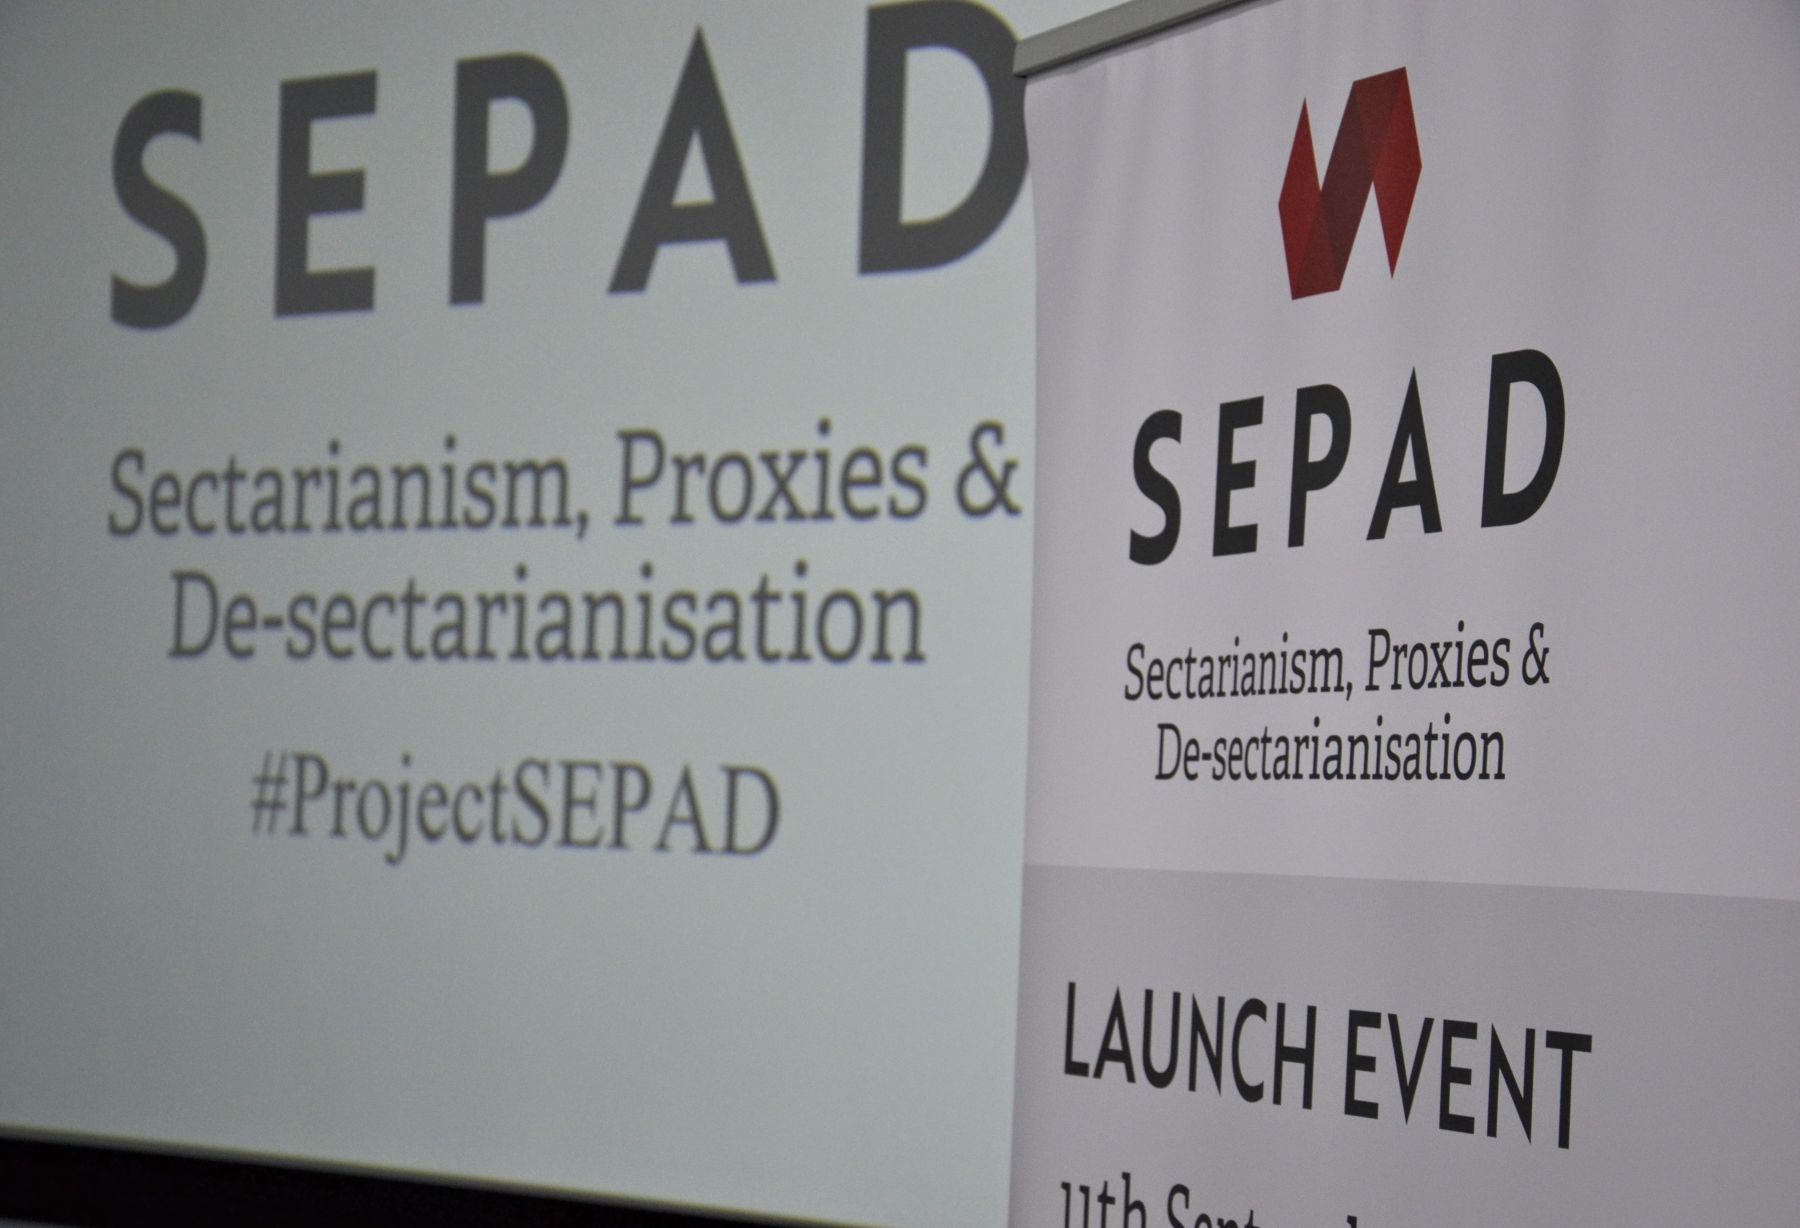 News: SEPAD Project Launched